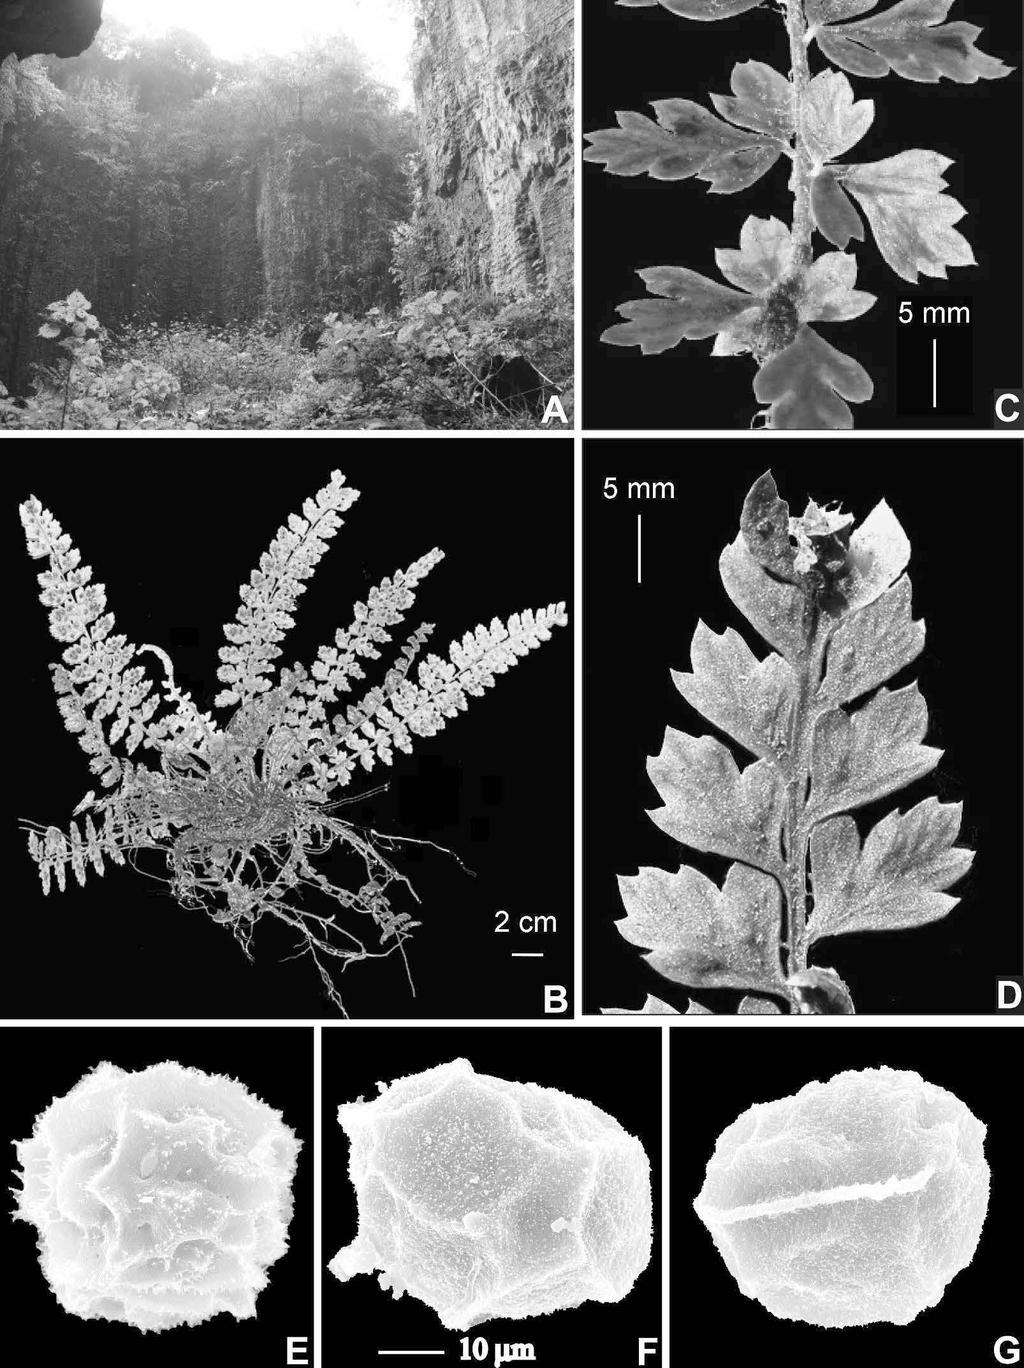 Volume 22, Number 2 Luo & Zhang 189 2012 Polystichum tiankengicola (Dryopteridaceae) from Guizhou, China Figure 2. Polystichum tiankengicola Li Bing Zhang, Q. Luo & P. S. Wang. A.